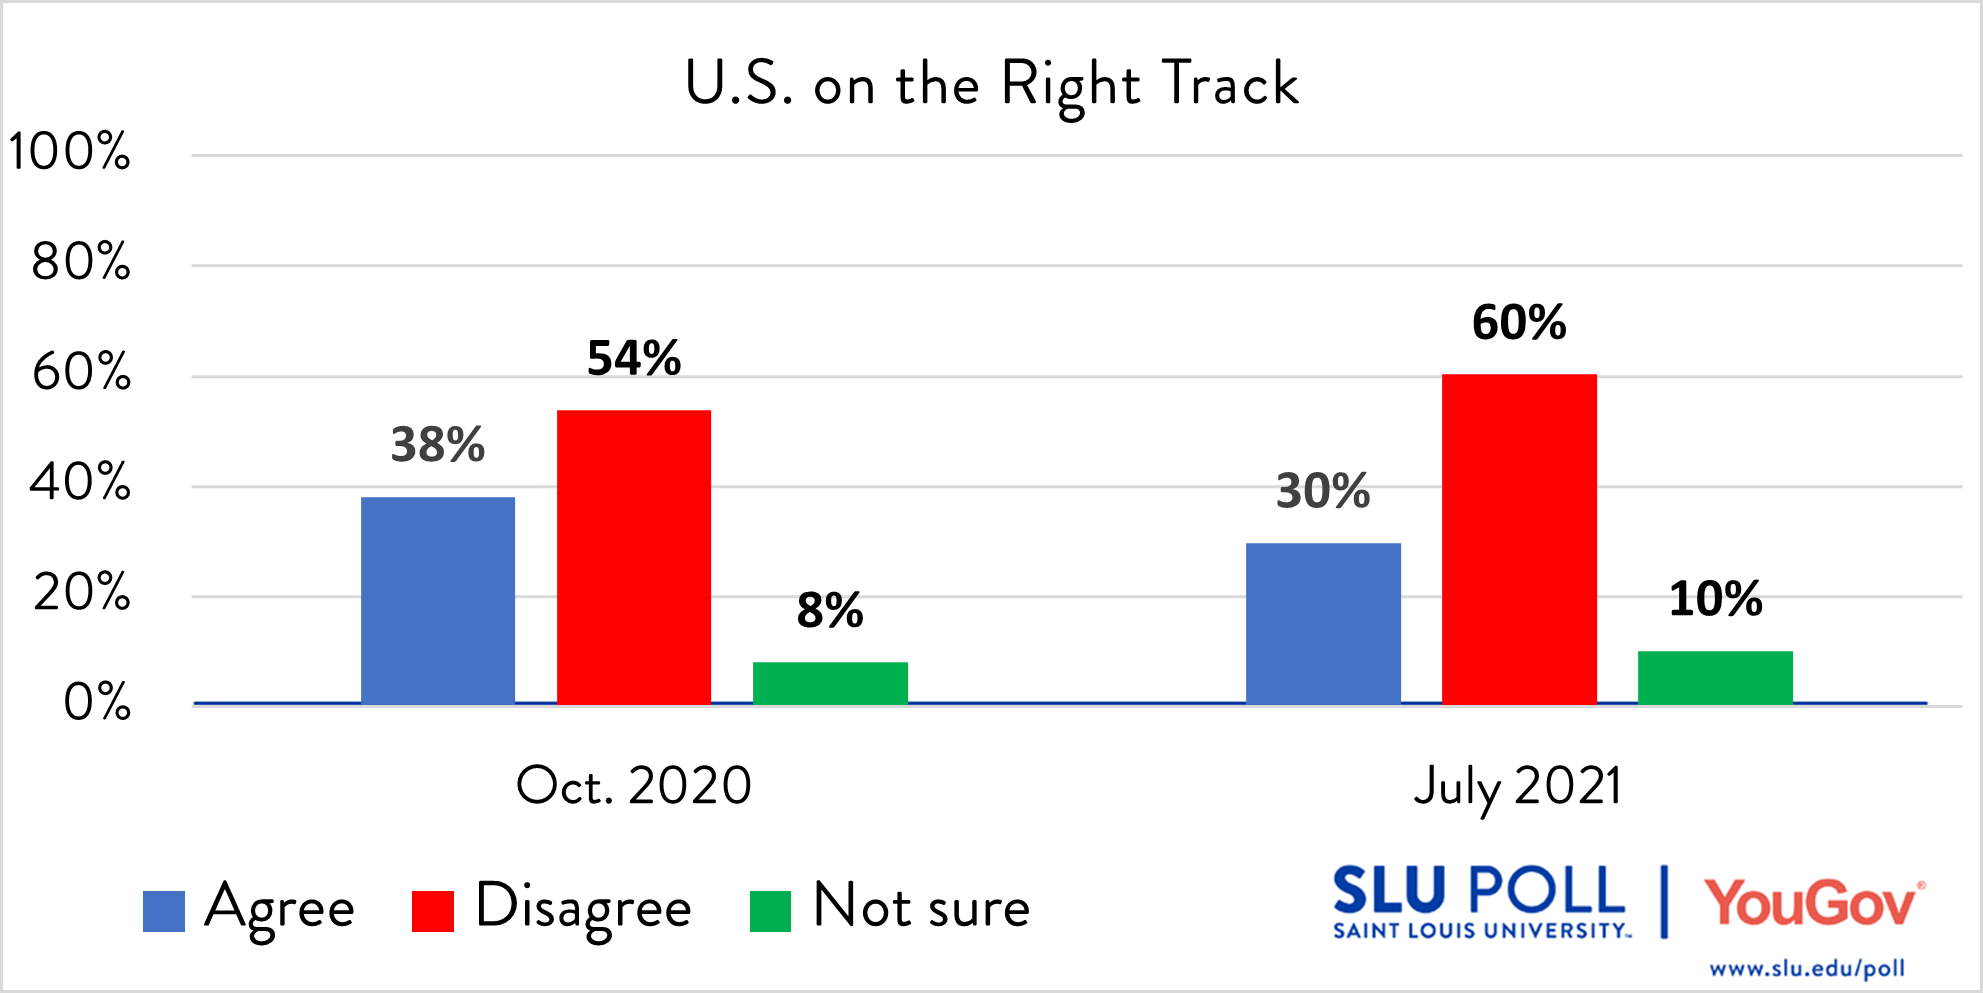 Do you agree or disagree with the following statements…The United States is on the right track and headed in a good direction? - Agree: 30% - Disagree: 60% - Not sure: 10% Subsample Question: The sample size for this question is 473. The margin of error for the full results for the above question is ± 5.81%.